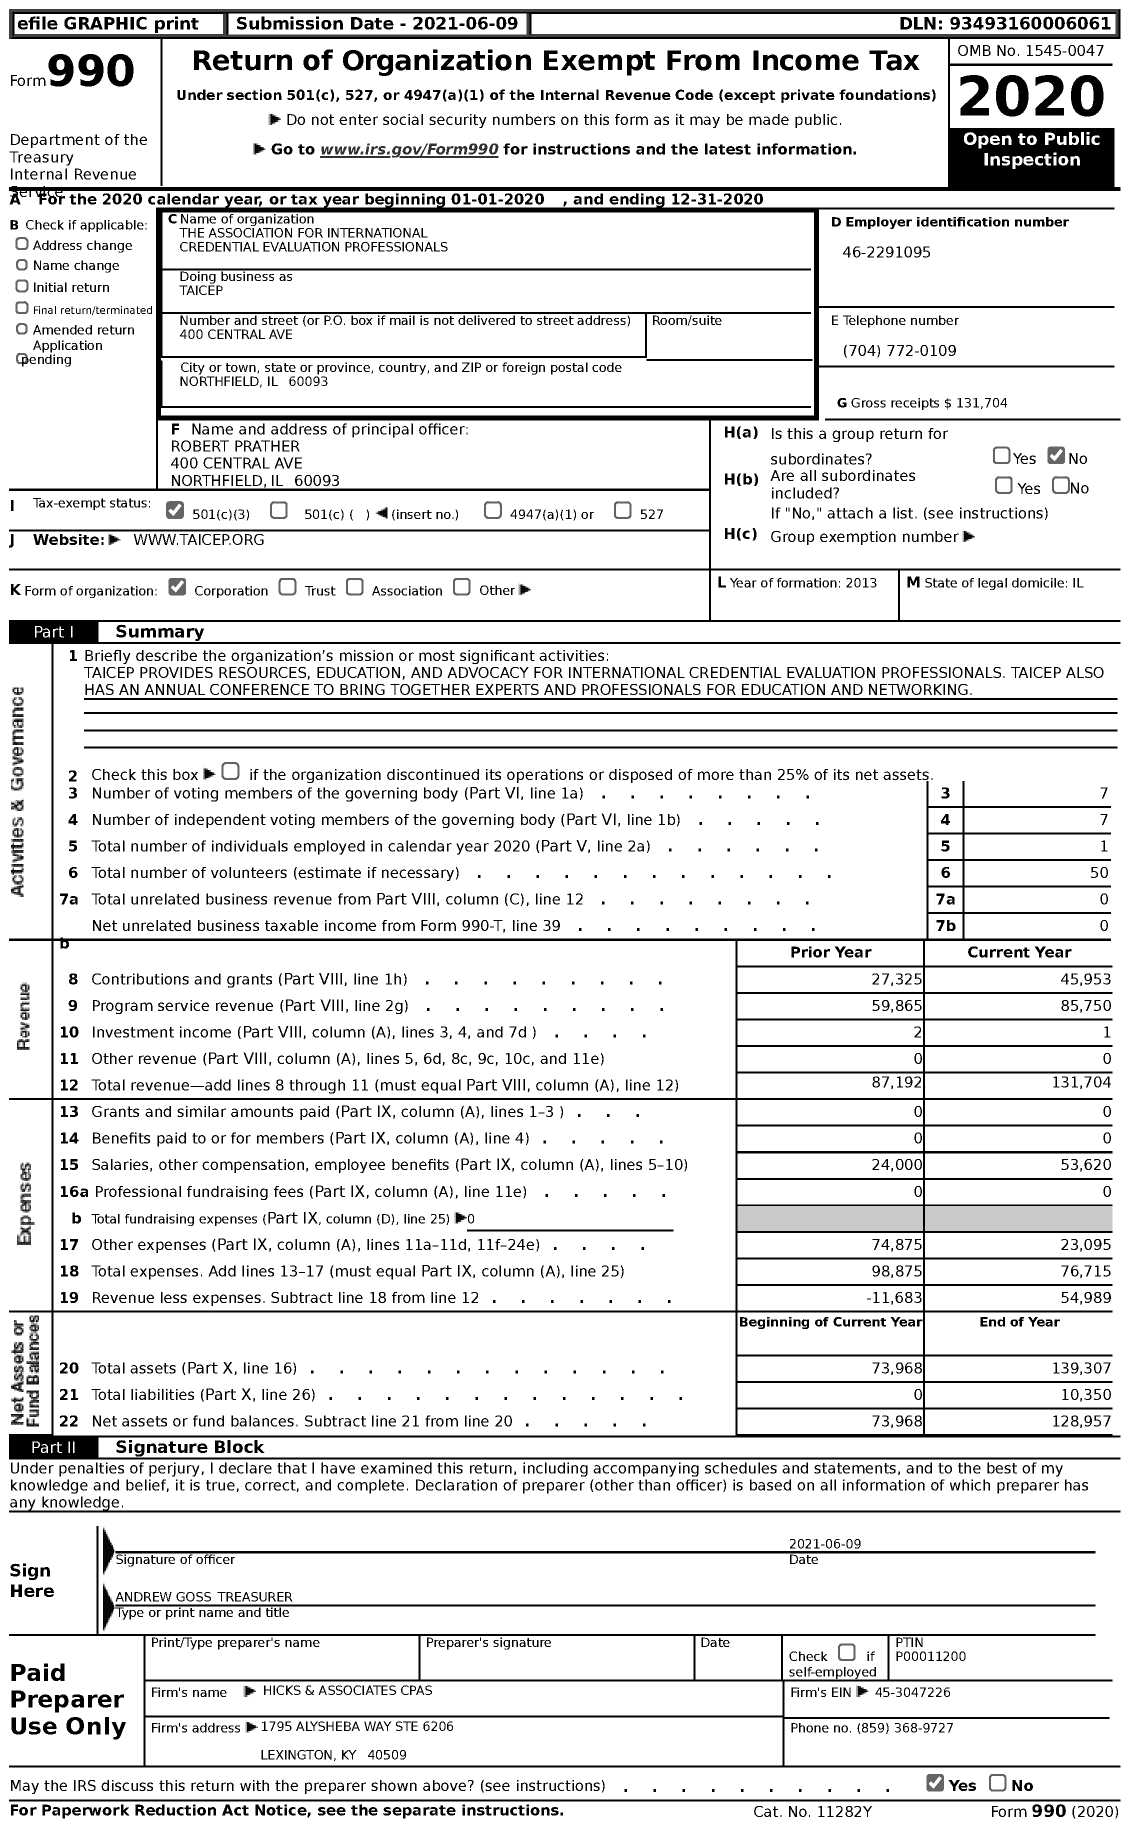 Image of first page of 2020 Form 990 for The Association for International Credential Evaluation Professionals (TAICEP)